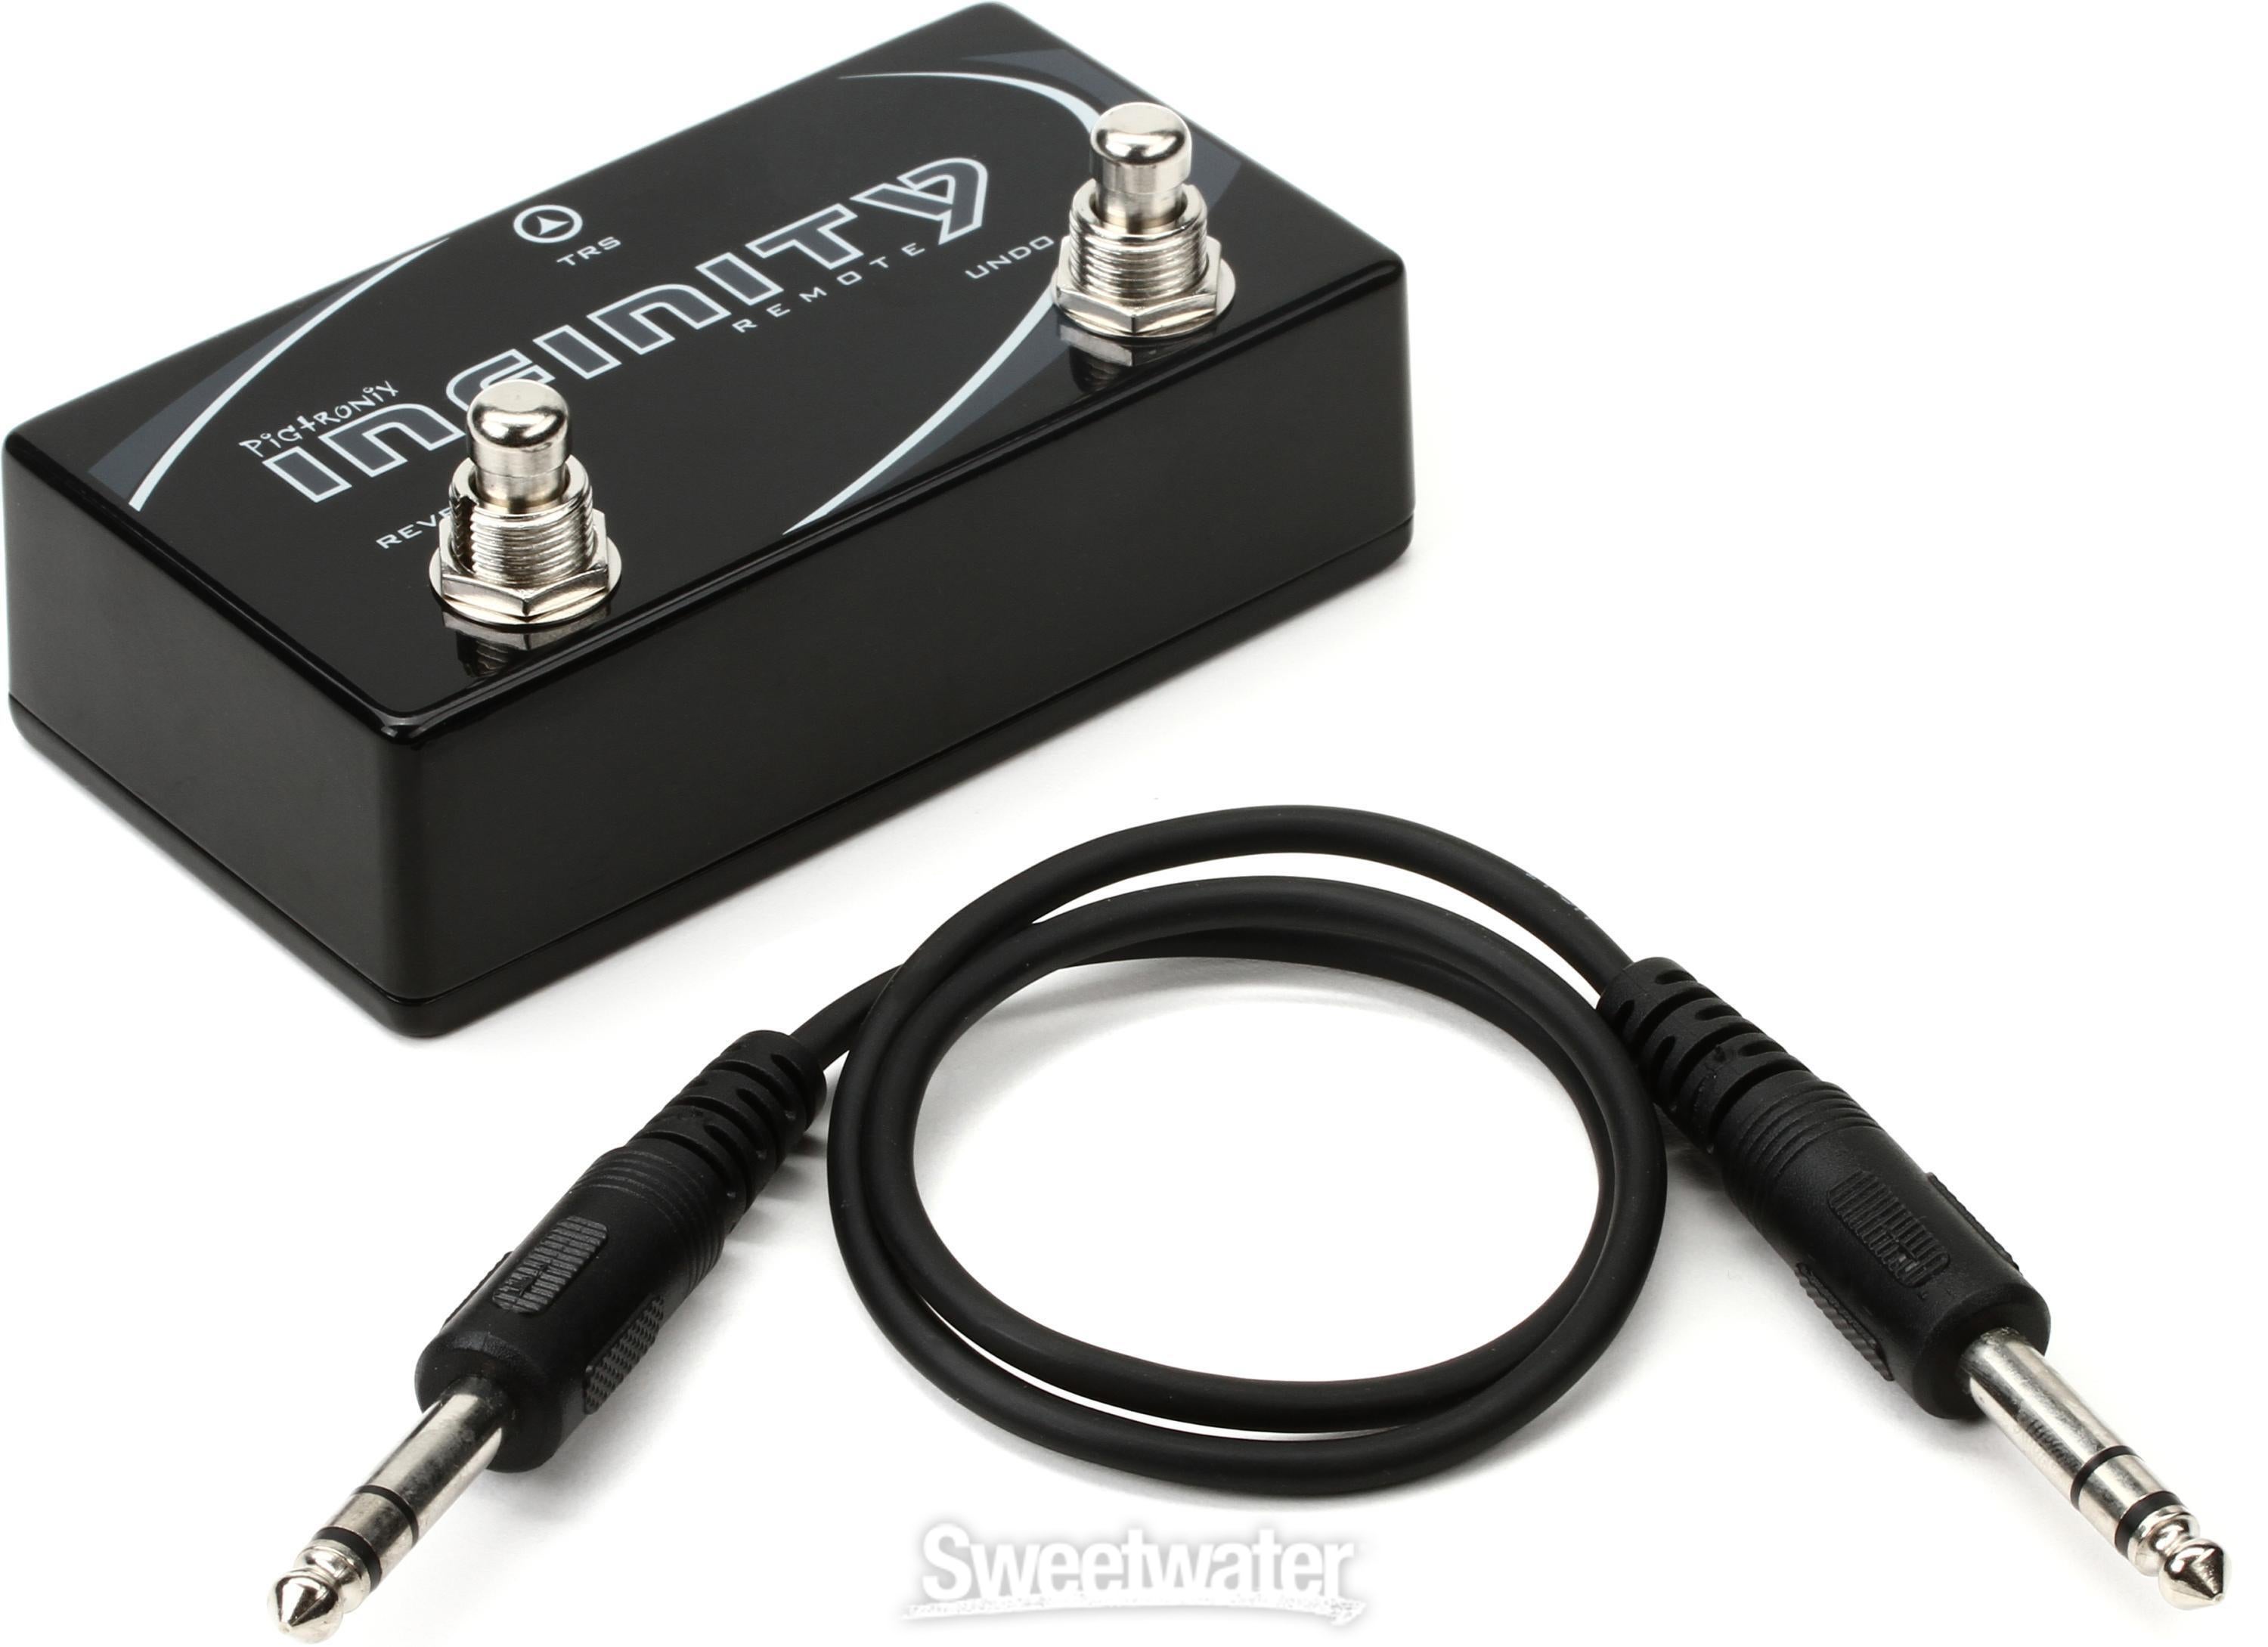 Pigtronix SPL-R Infinity Looper Remote Switch | Sweetwater